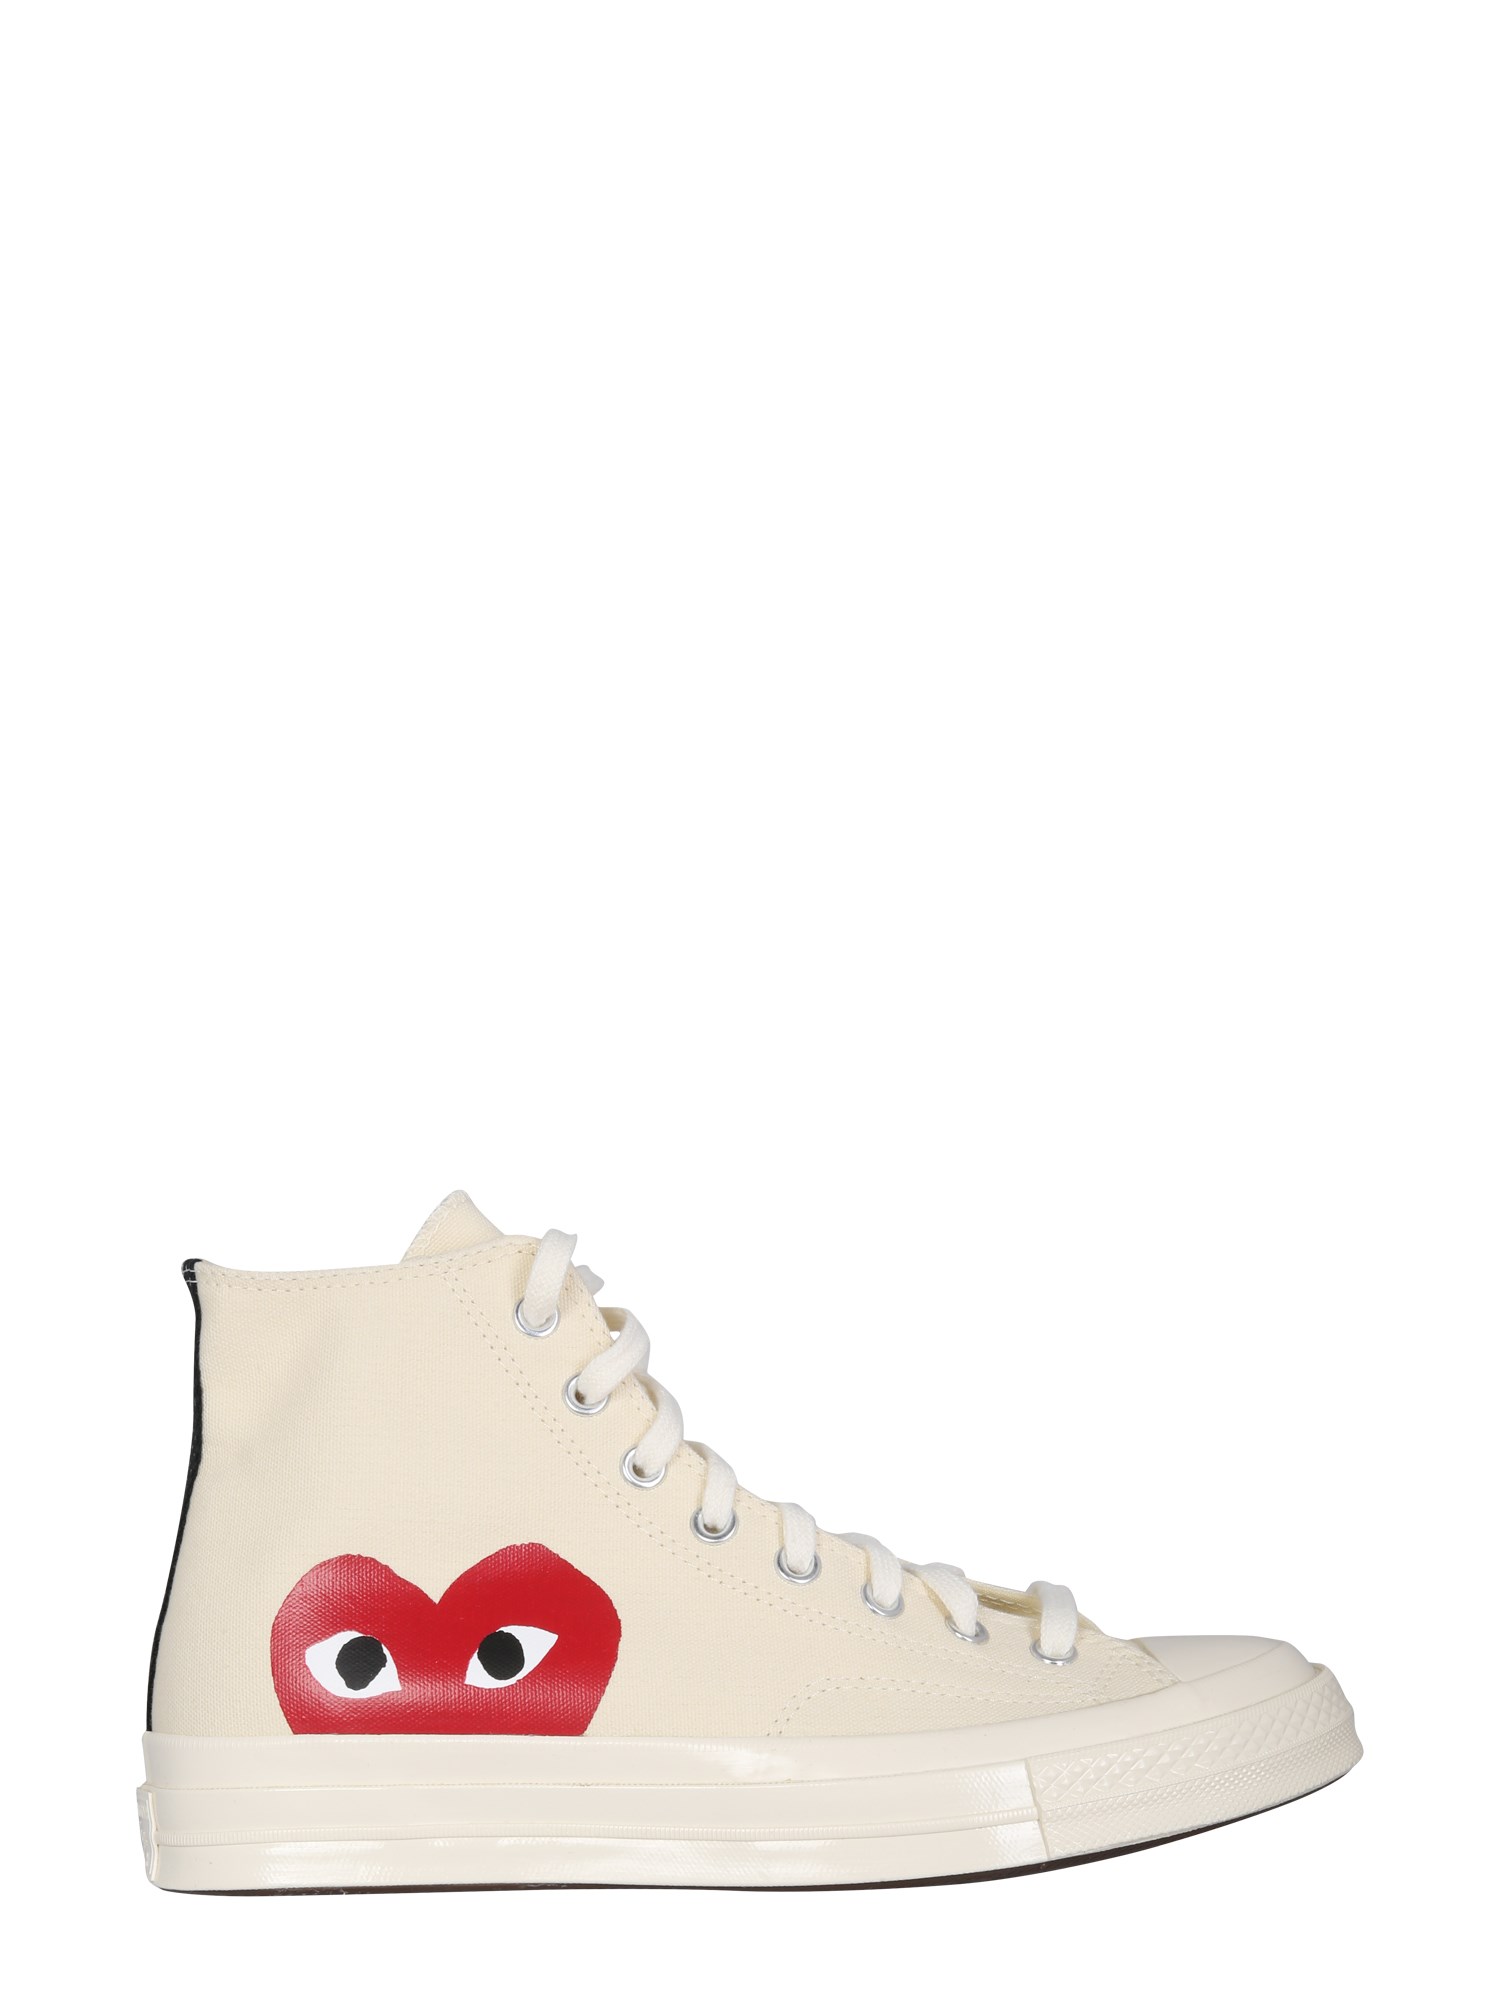 Comme Des Garcons Play Converse Canvas High Top Sneakers In White